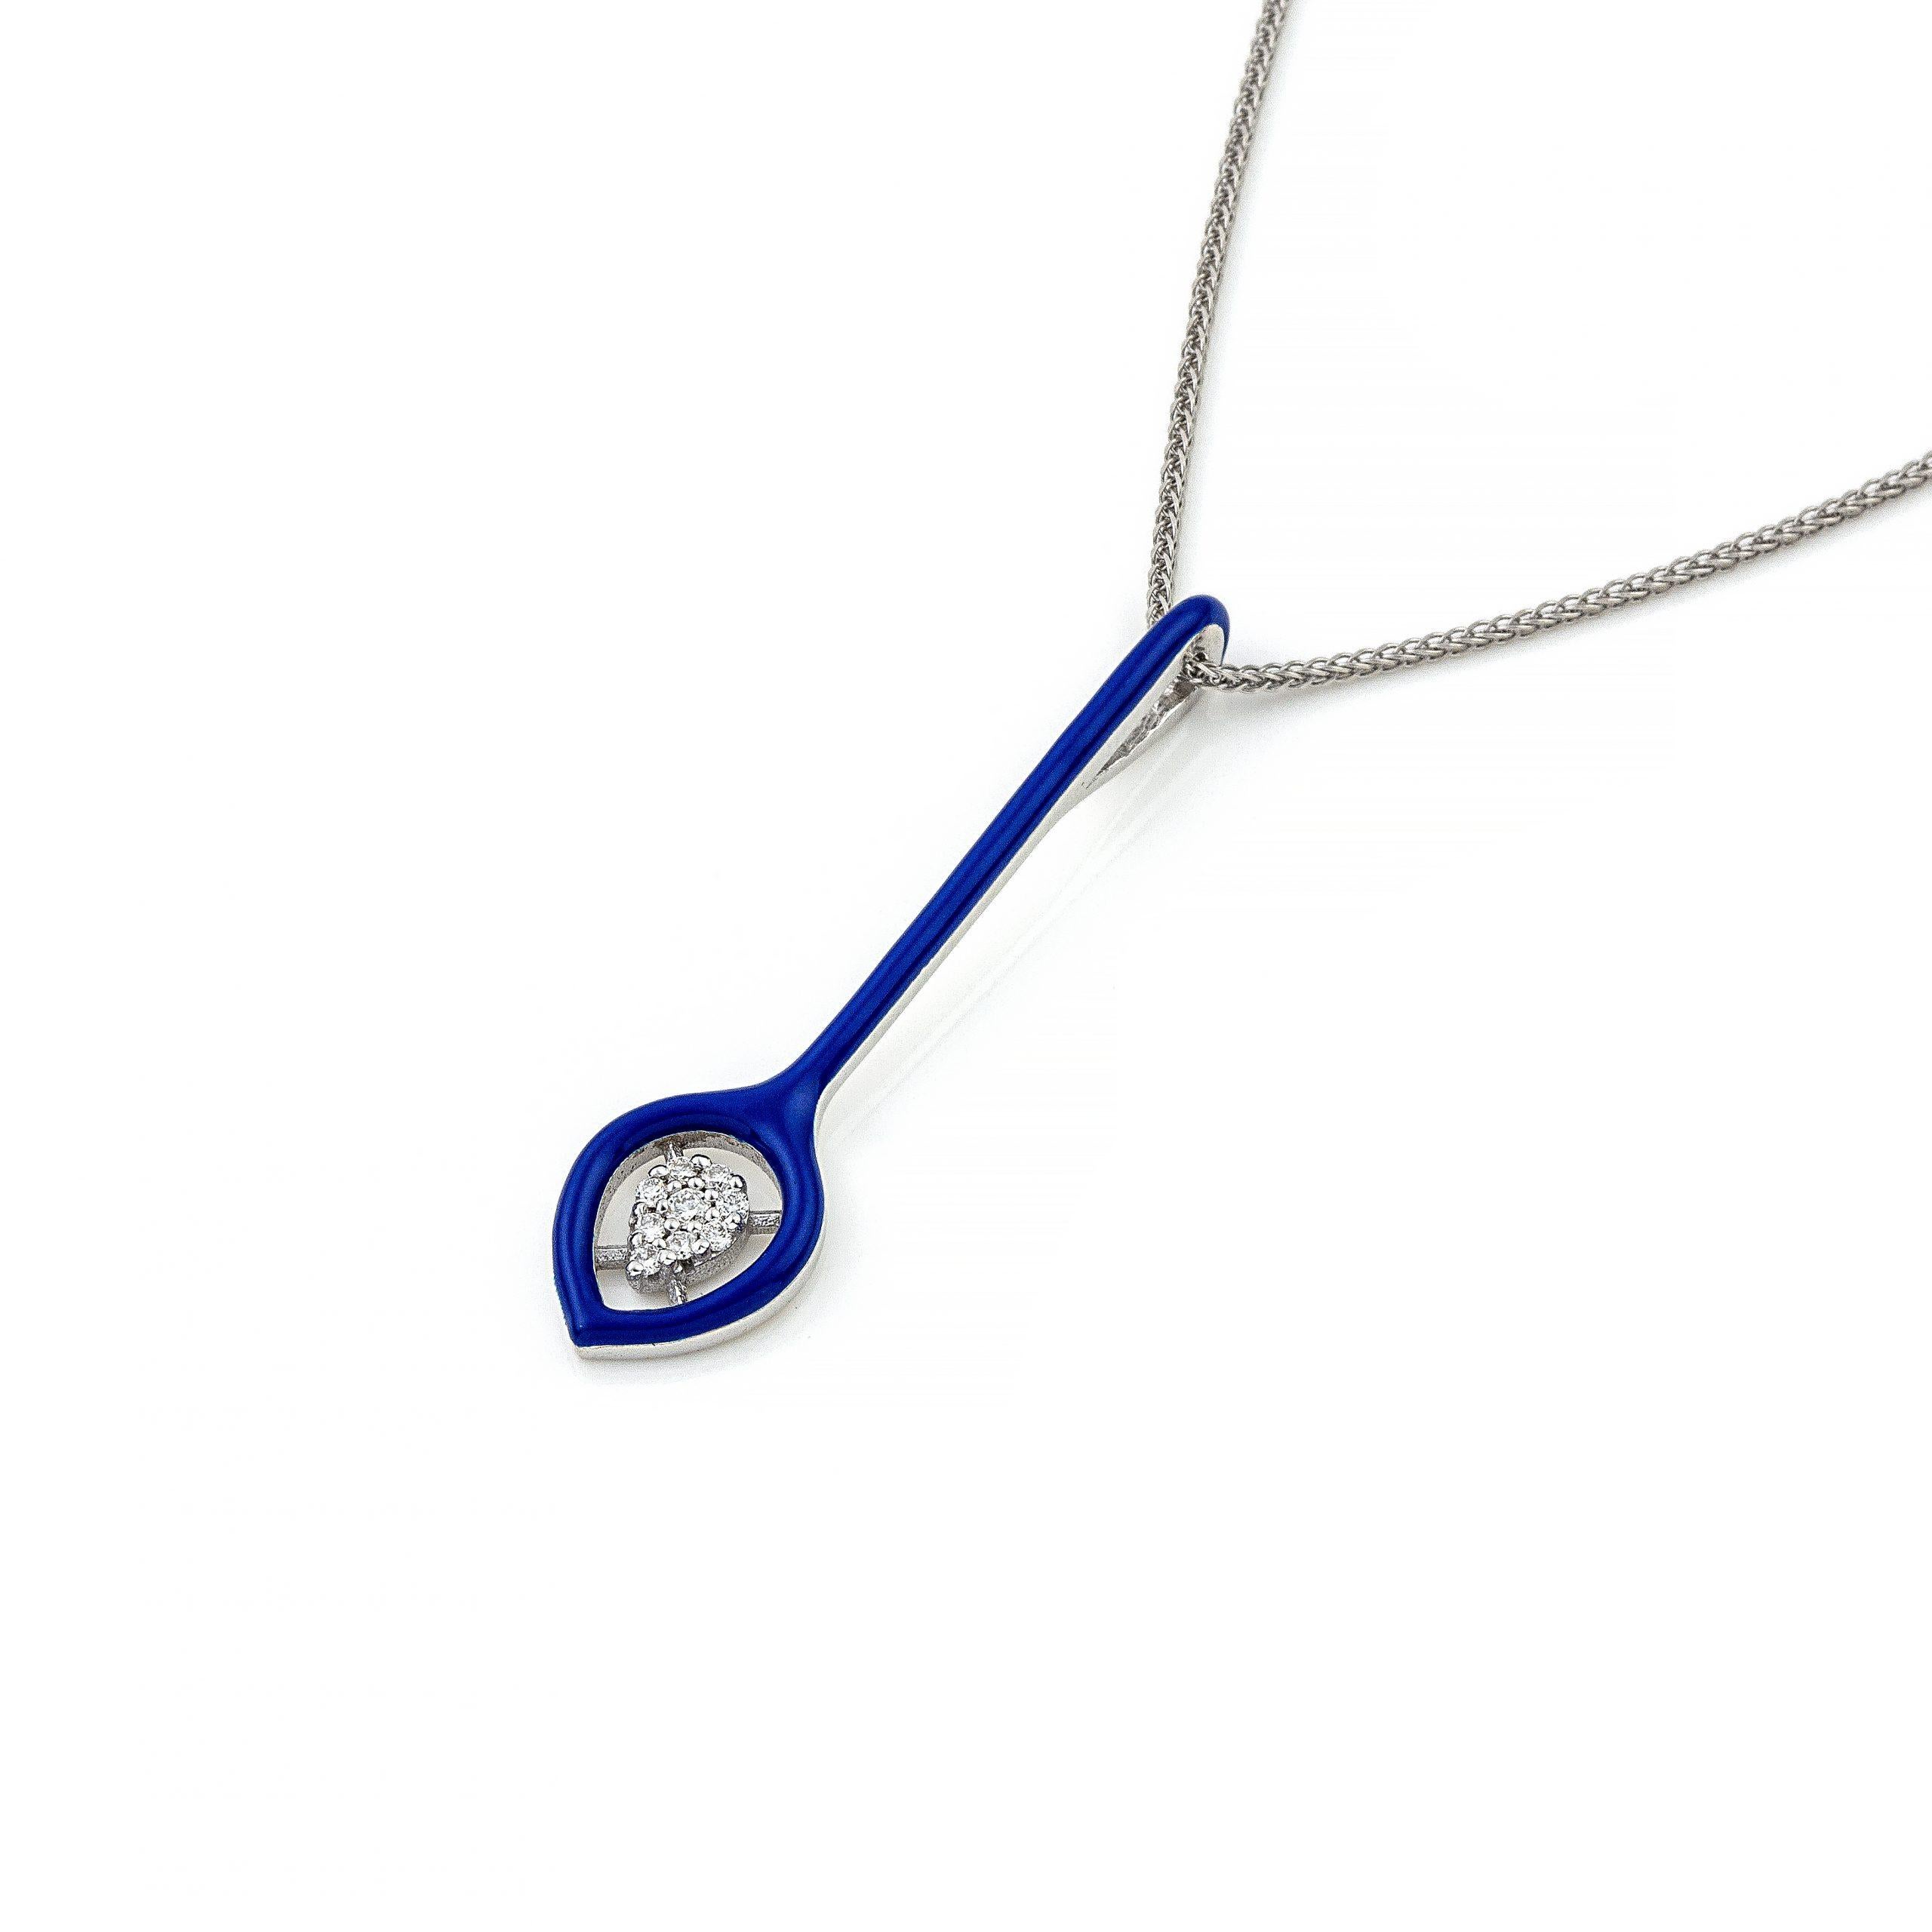 100% Recycled 14 K White Gold

Diamonds

Enamel

Size: 4 cm/1.57 inches

THIS PENDANT IS SOLD WITHOUT THE CHAIN.

A 14K CHAIN CAN BE OPTIONALLY ADDED WITH AN ADDITIONAL COST OF 360 USD.

In the arts, maximalism, a reaction against minimalism, is an